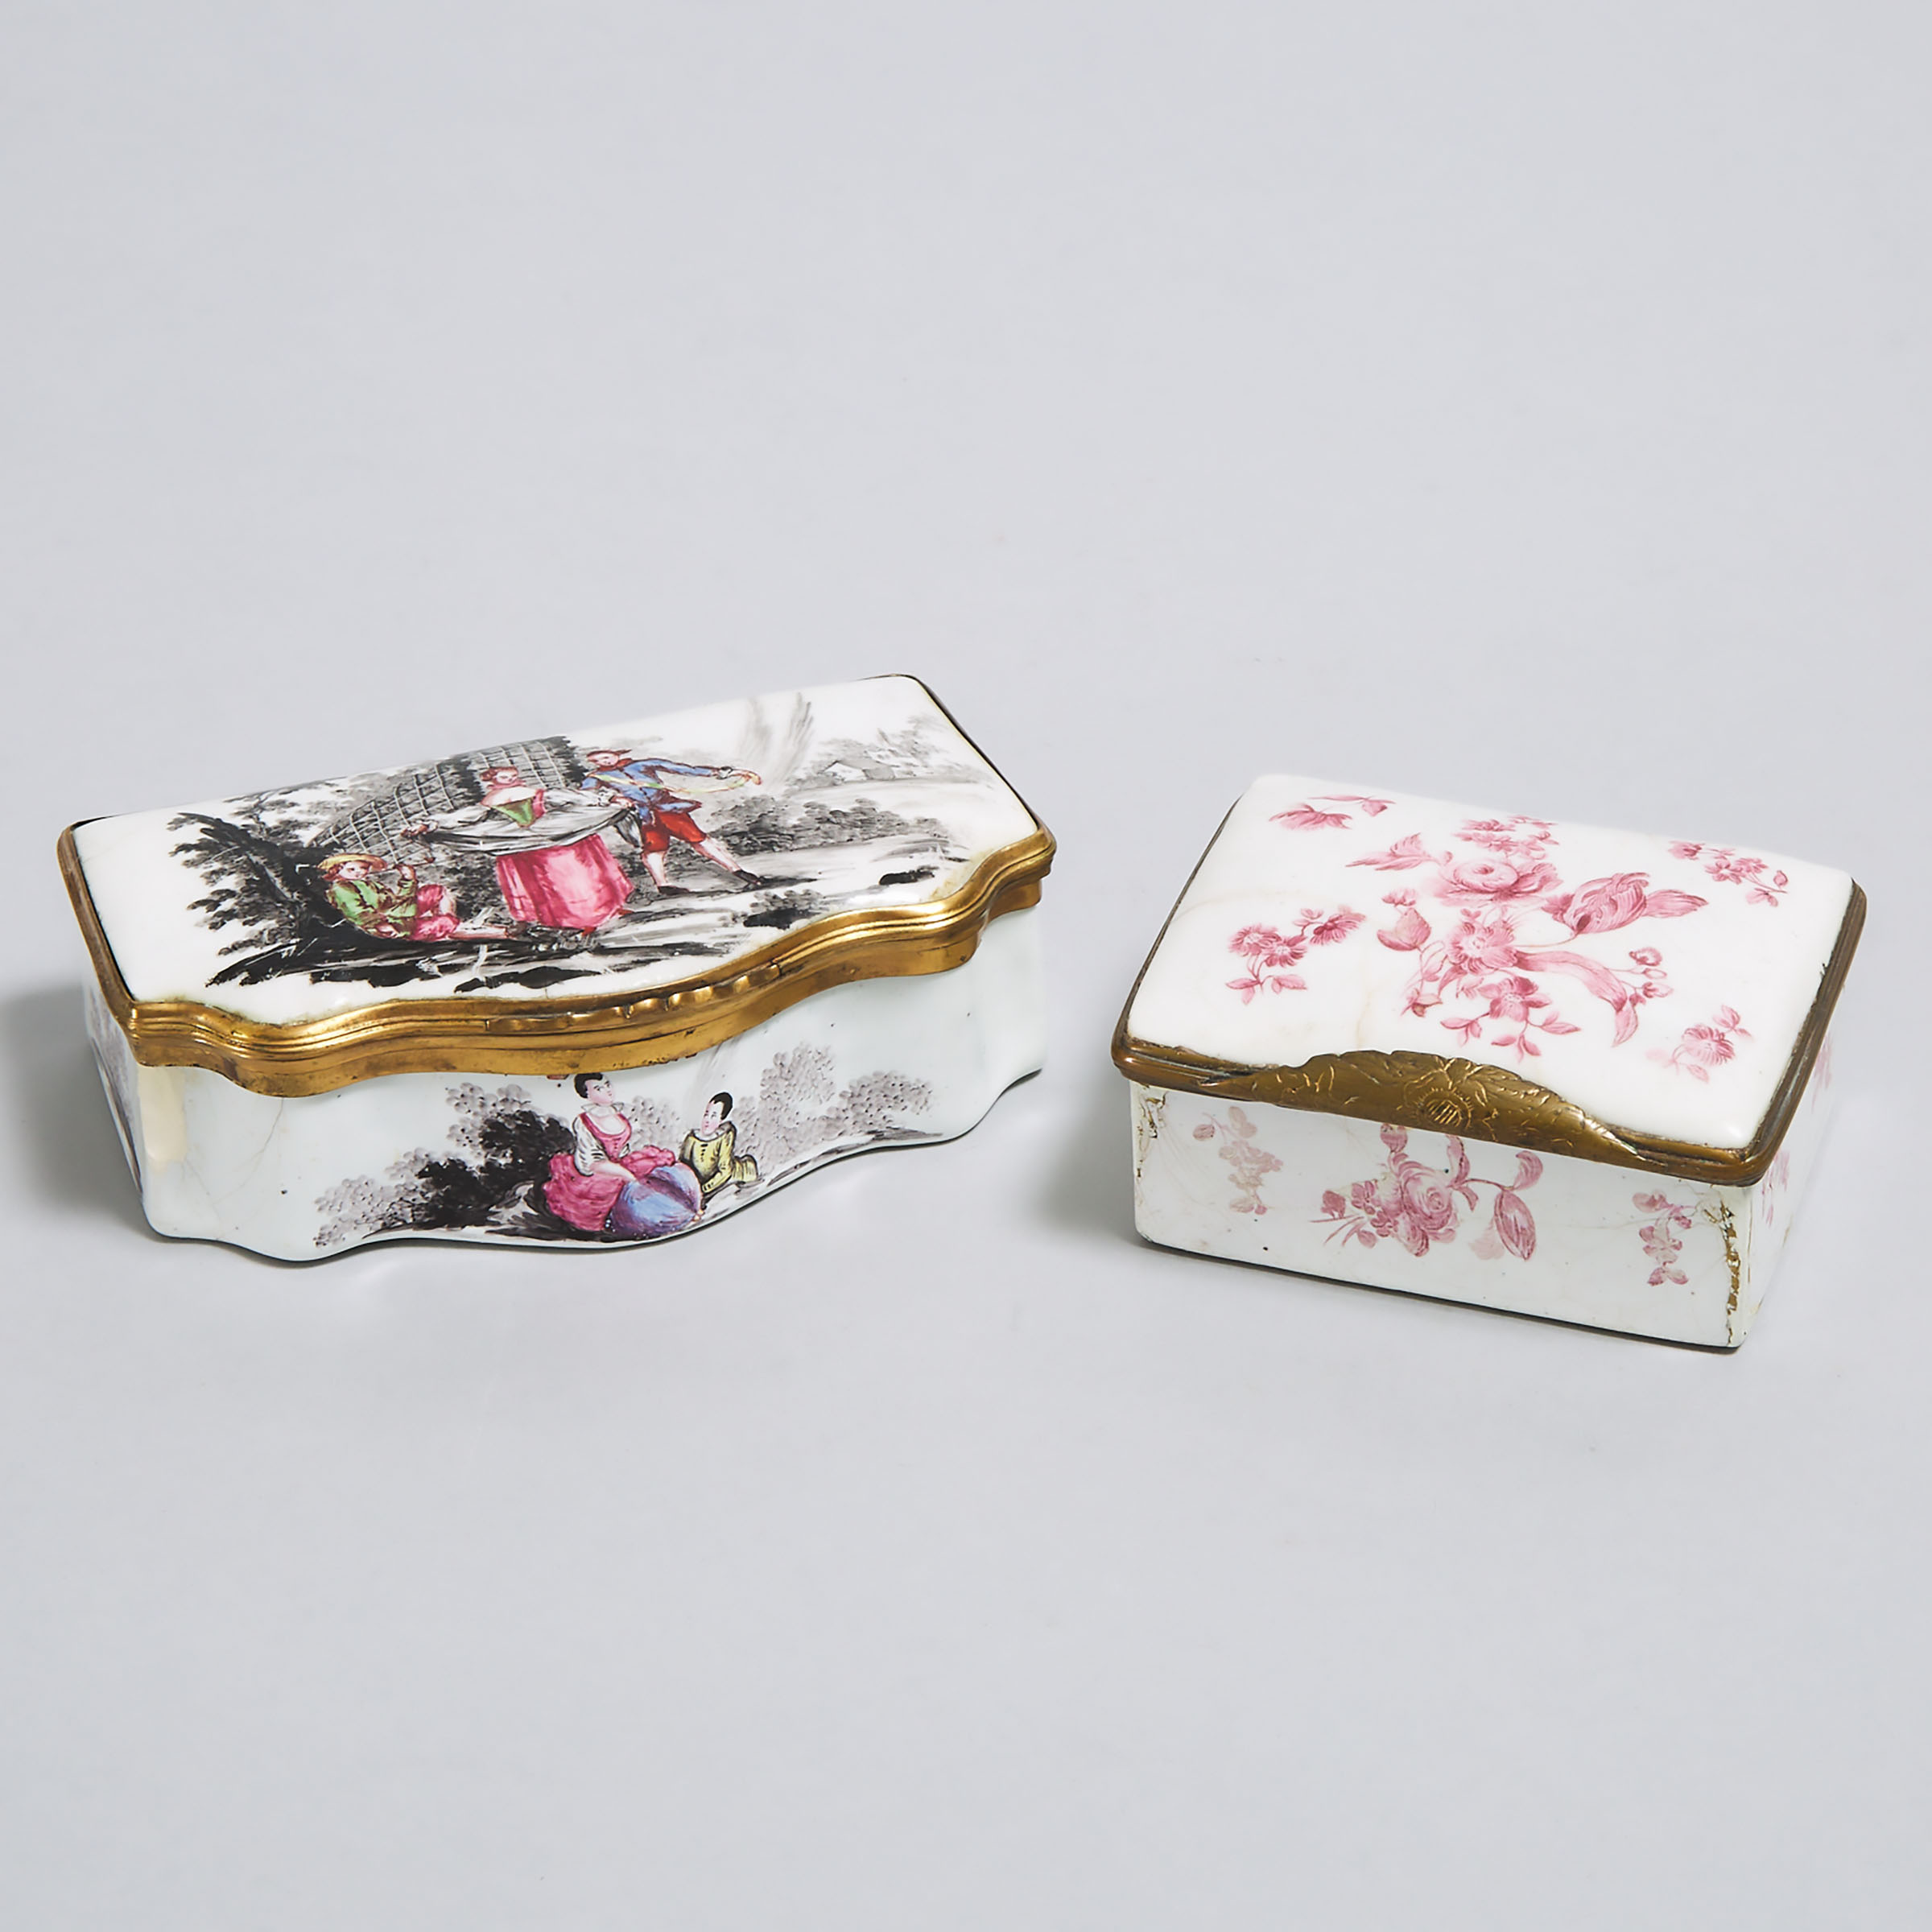 Two French Enamel Table Boxes, late 18th century